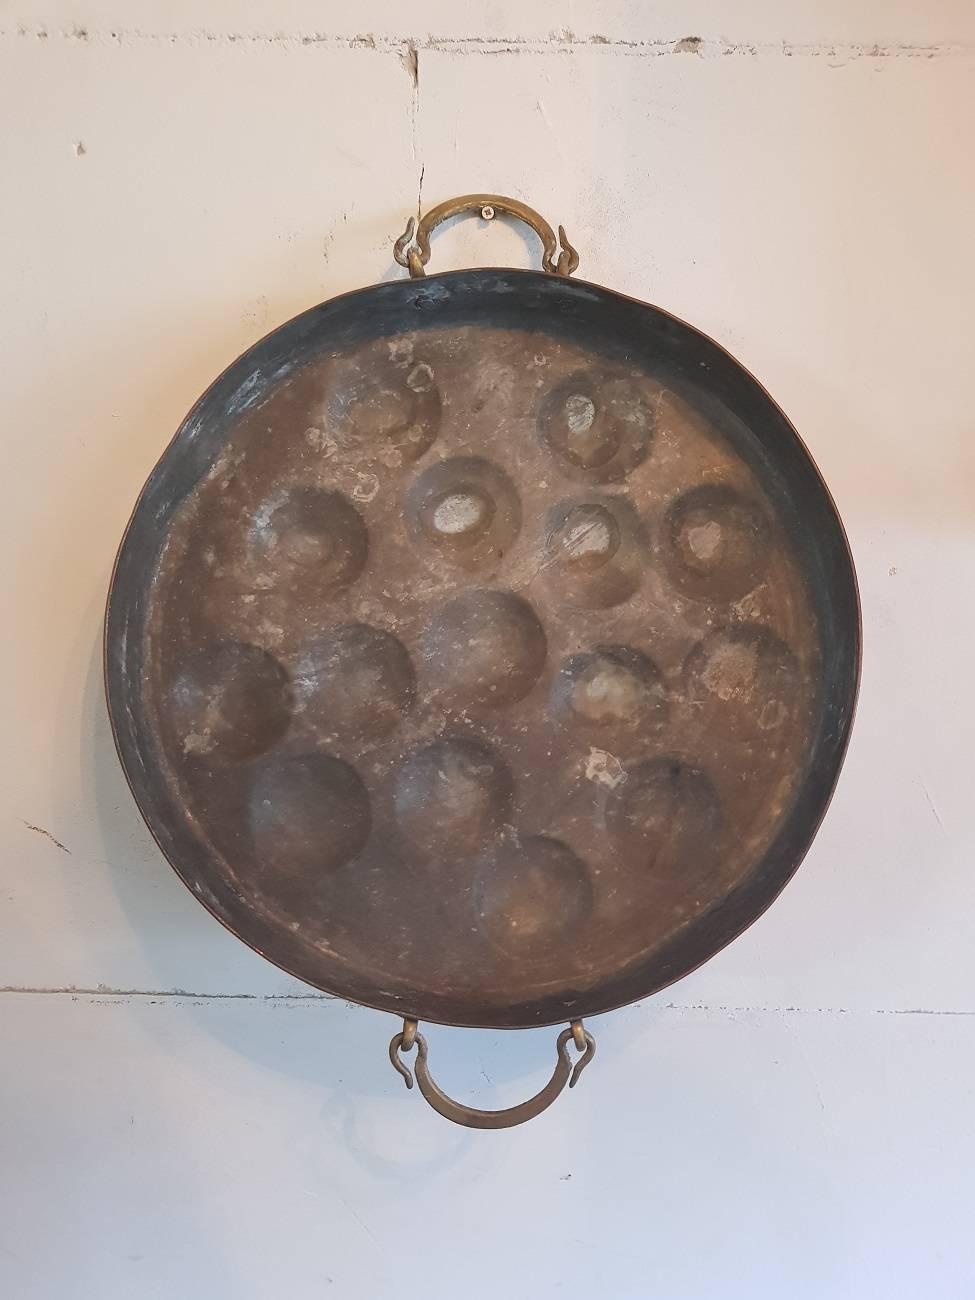 Beautiful Large Old Dutch copper mini pancake pan with the initials B E A and the year 1938 stamped on the side. Very decorative in a rural kitchen interior.

The measurements are,
Depth 7 cm/ 2.7 inch.
Width 45 cm/ 17.7 inch.
Height 45 cm/